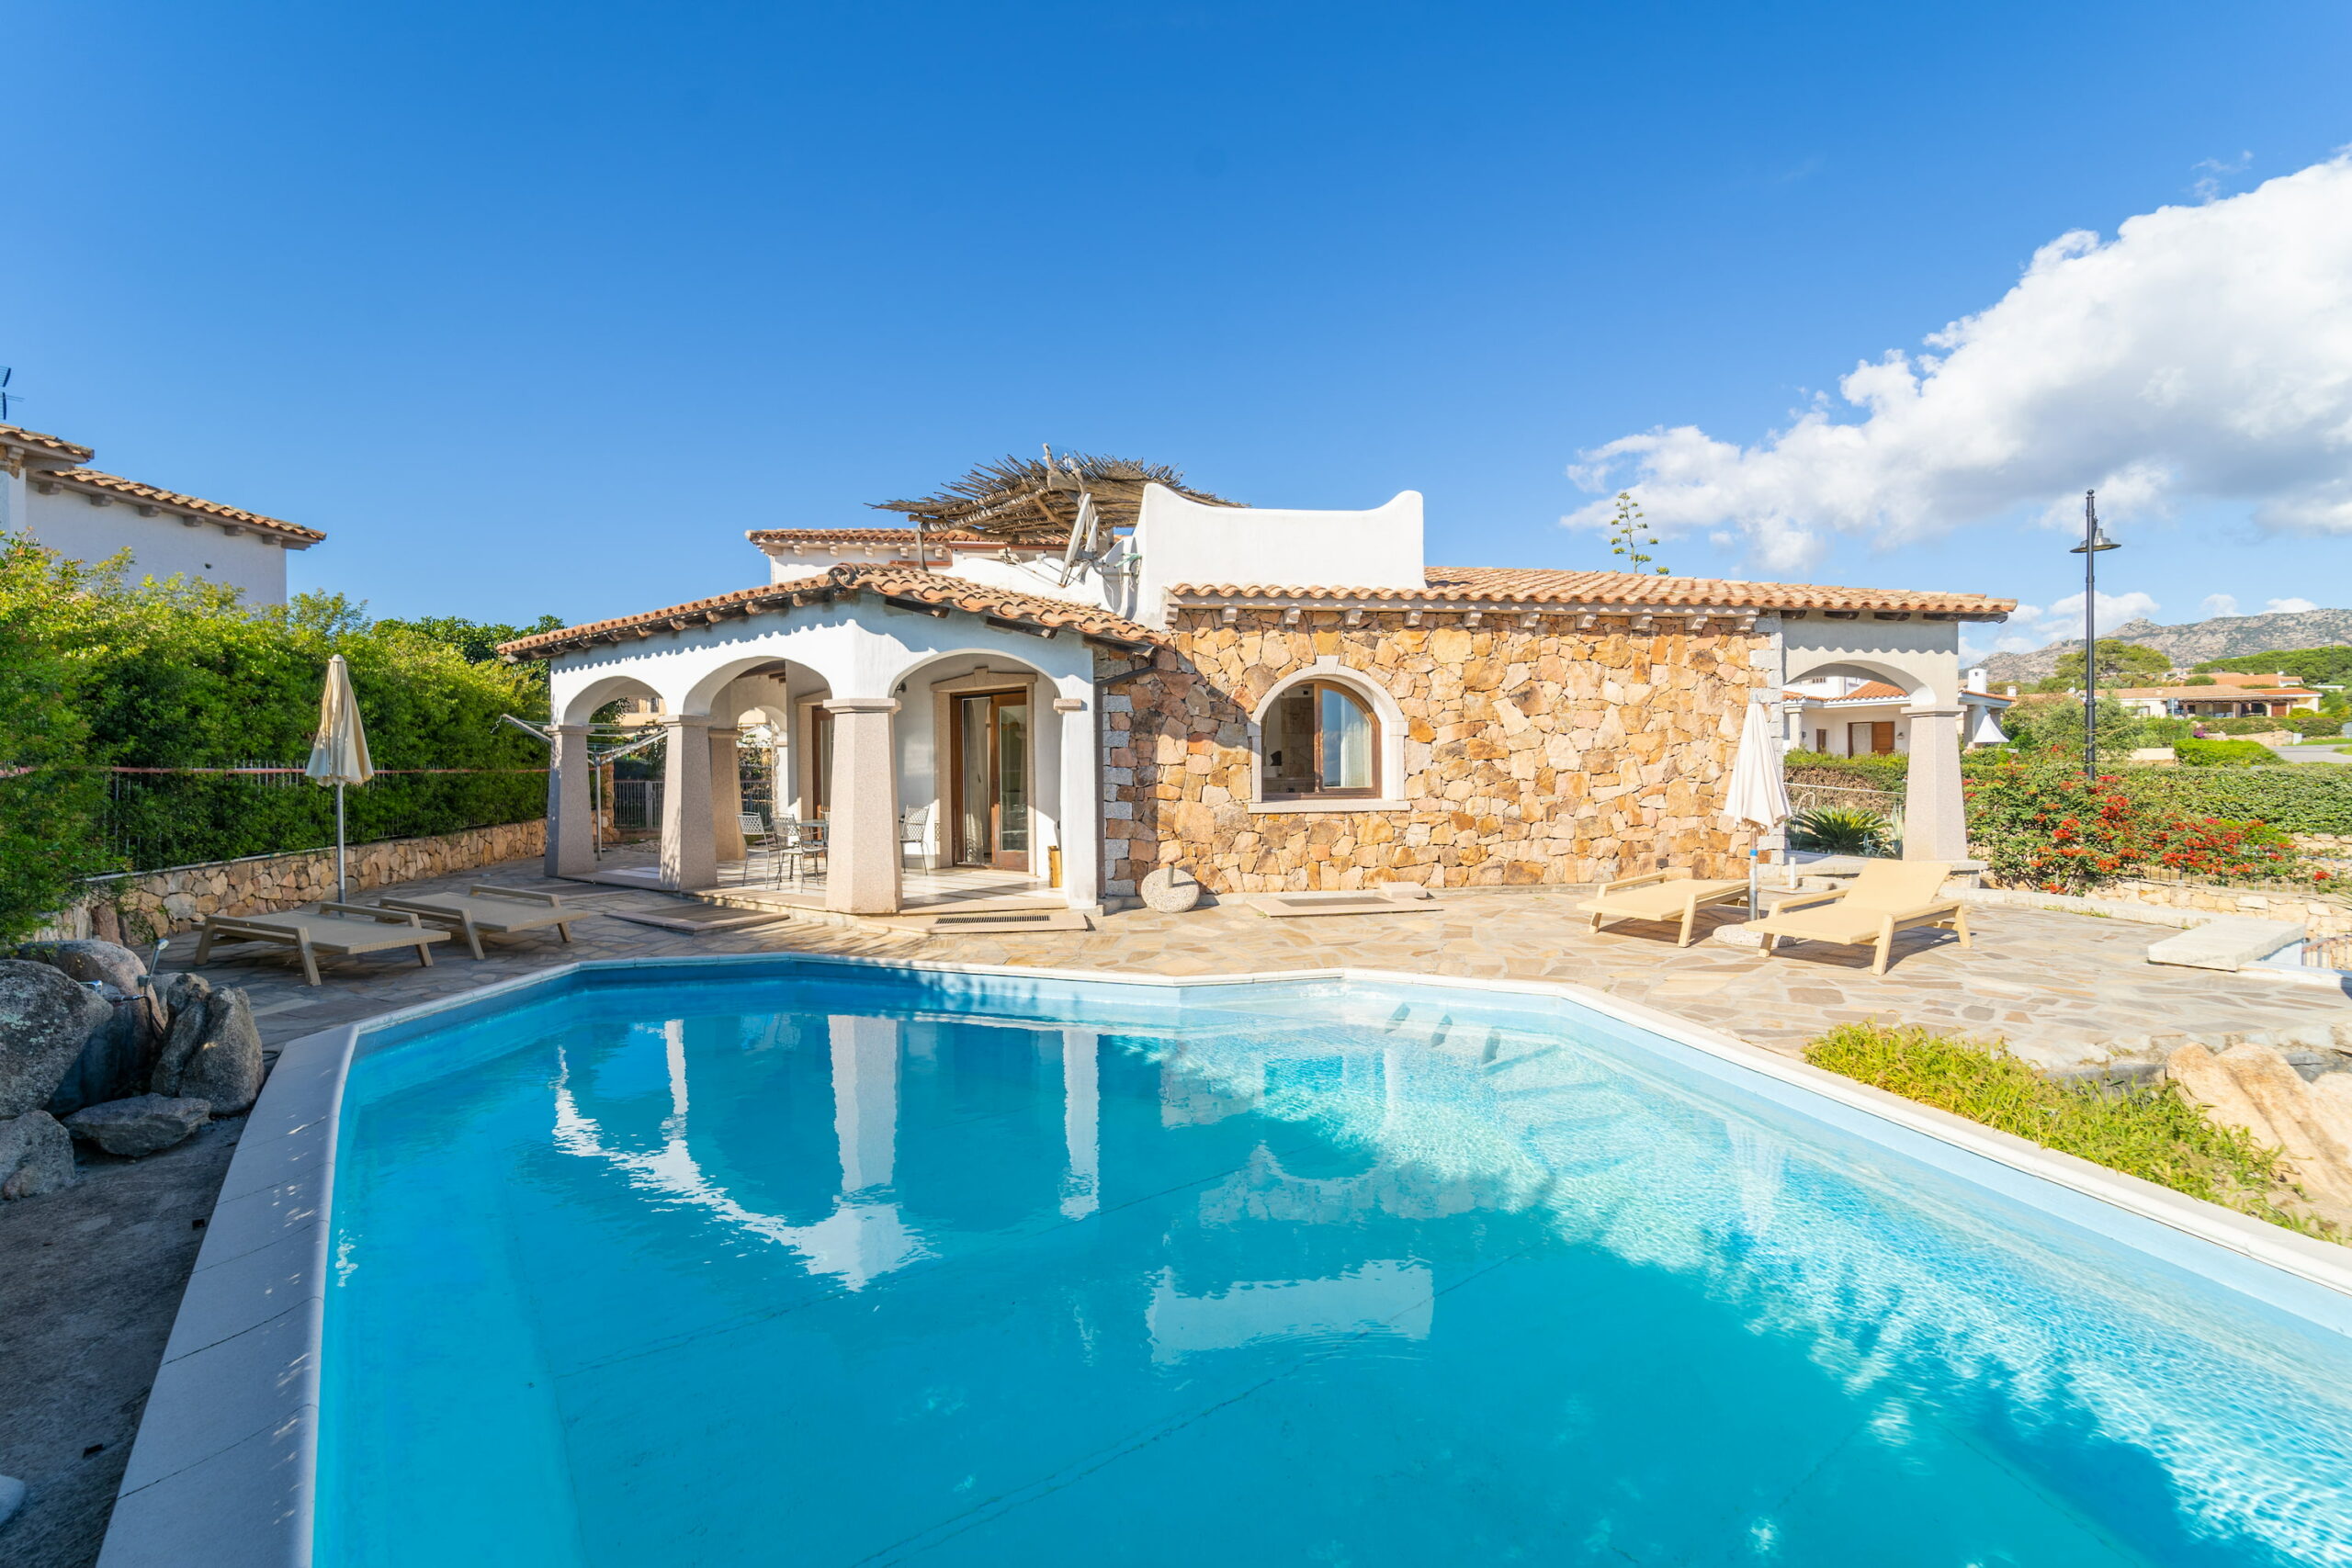 govonilaw sardinia villa for sale pool italy luxury property lawyers real estate agents